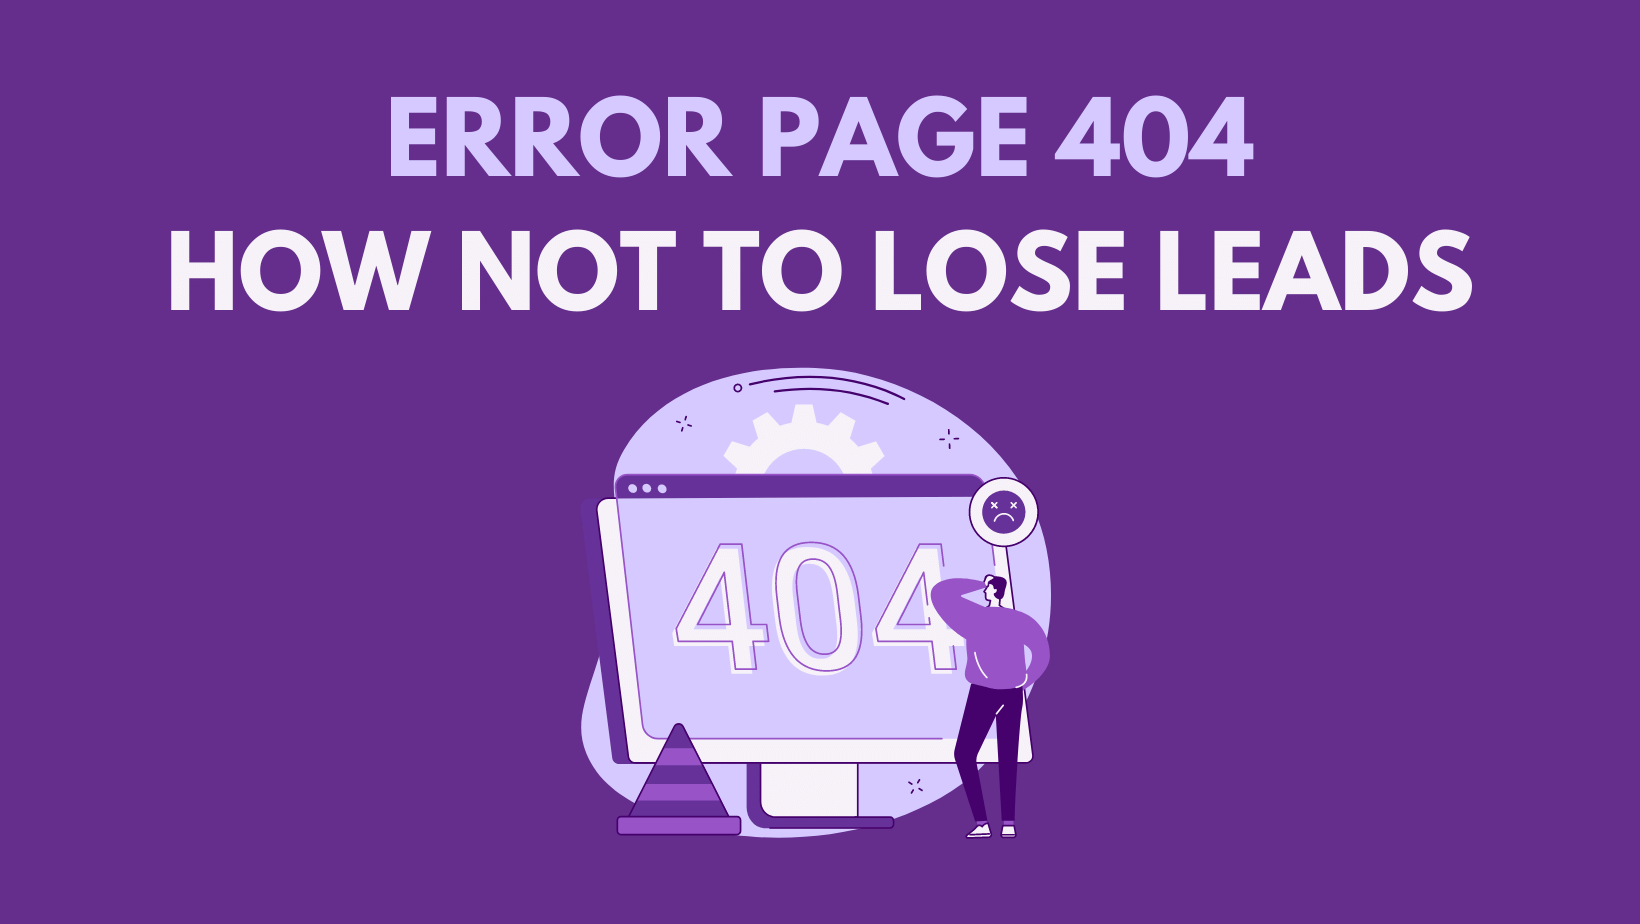 All create dashboard sites are 404ing/giving blank webpage